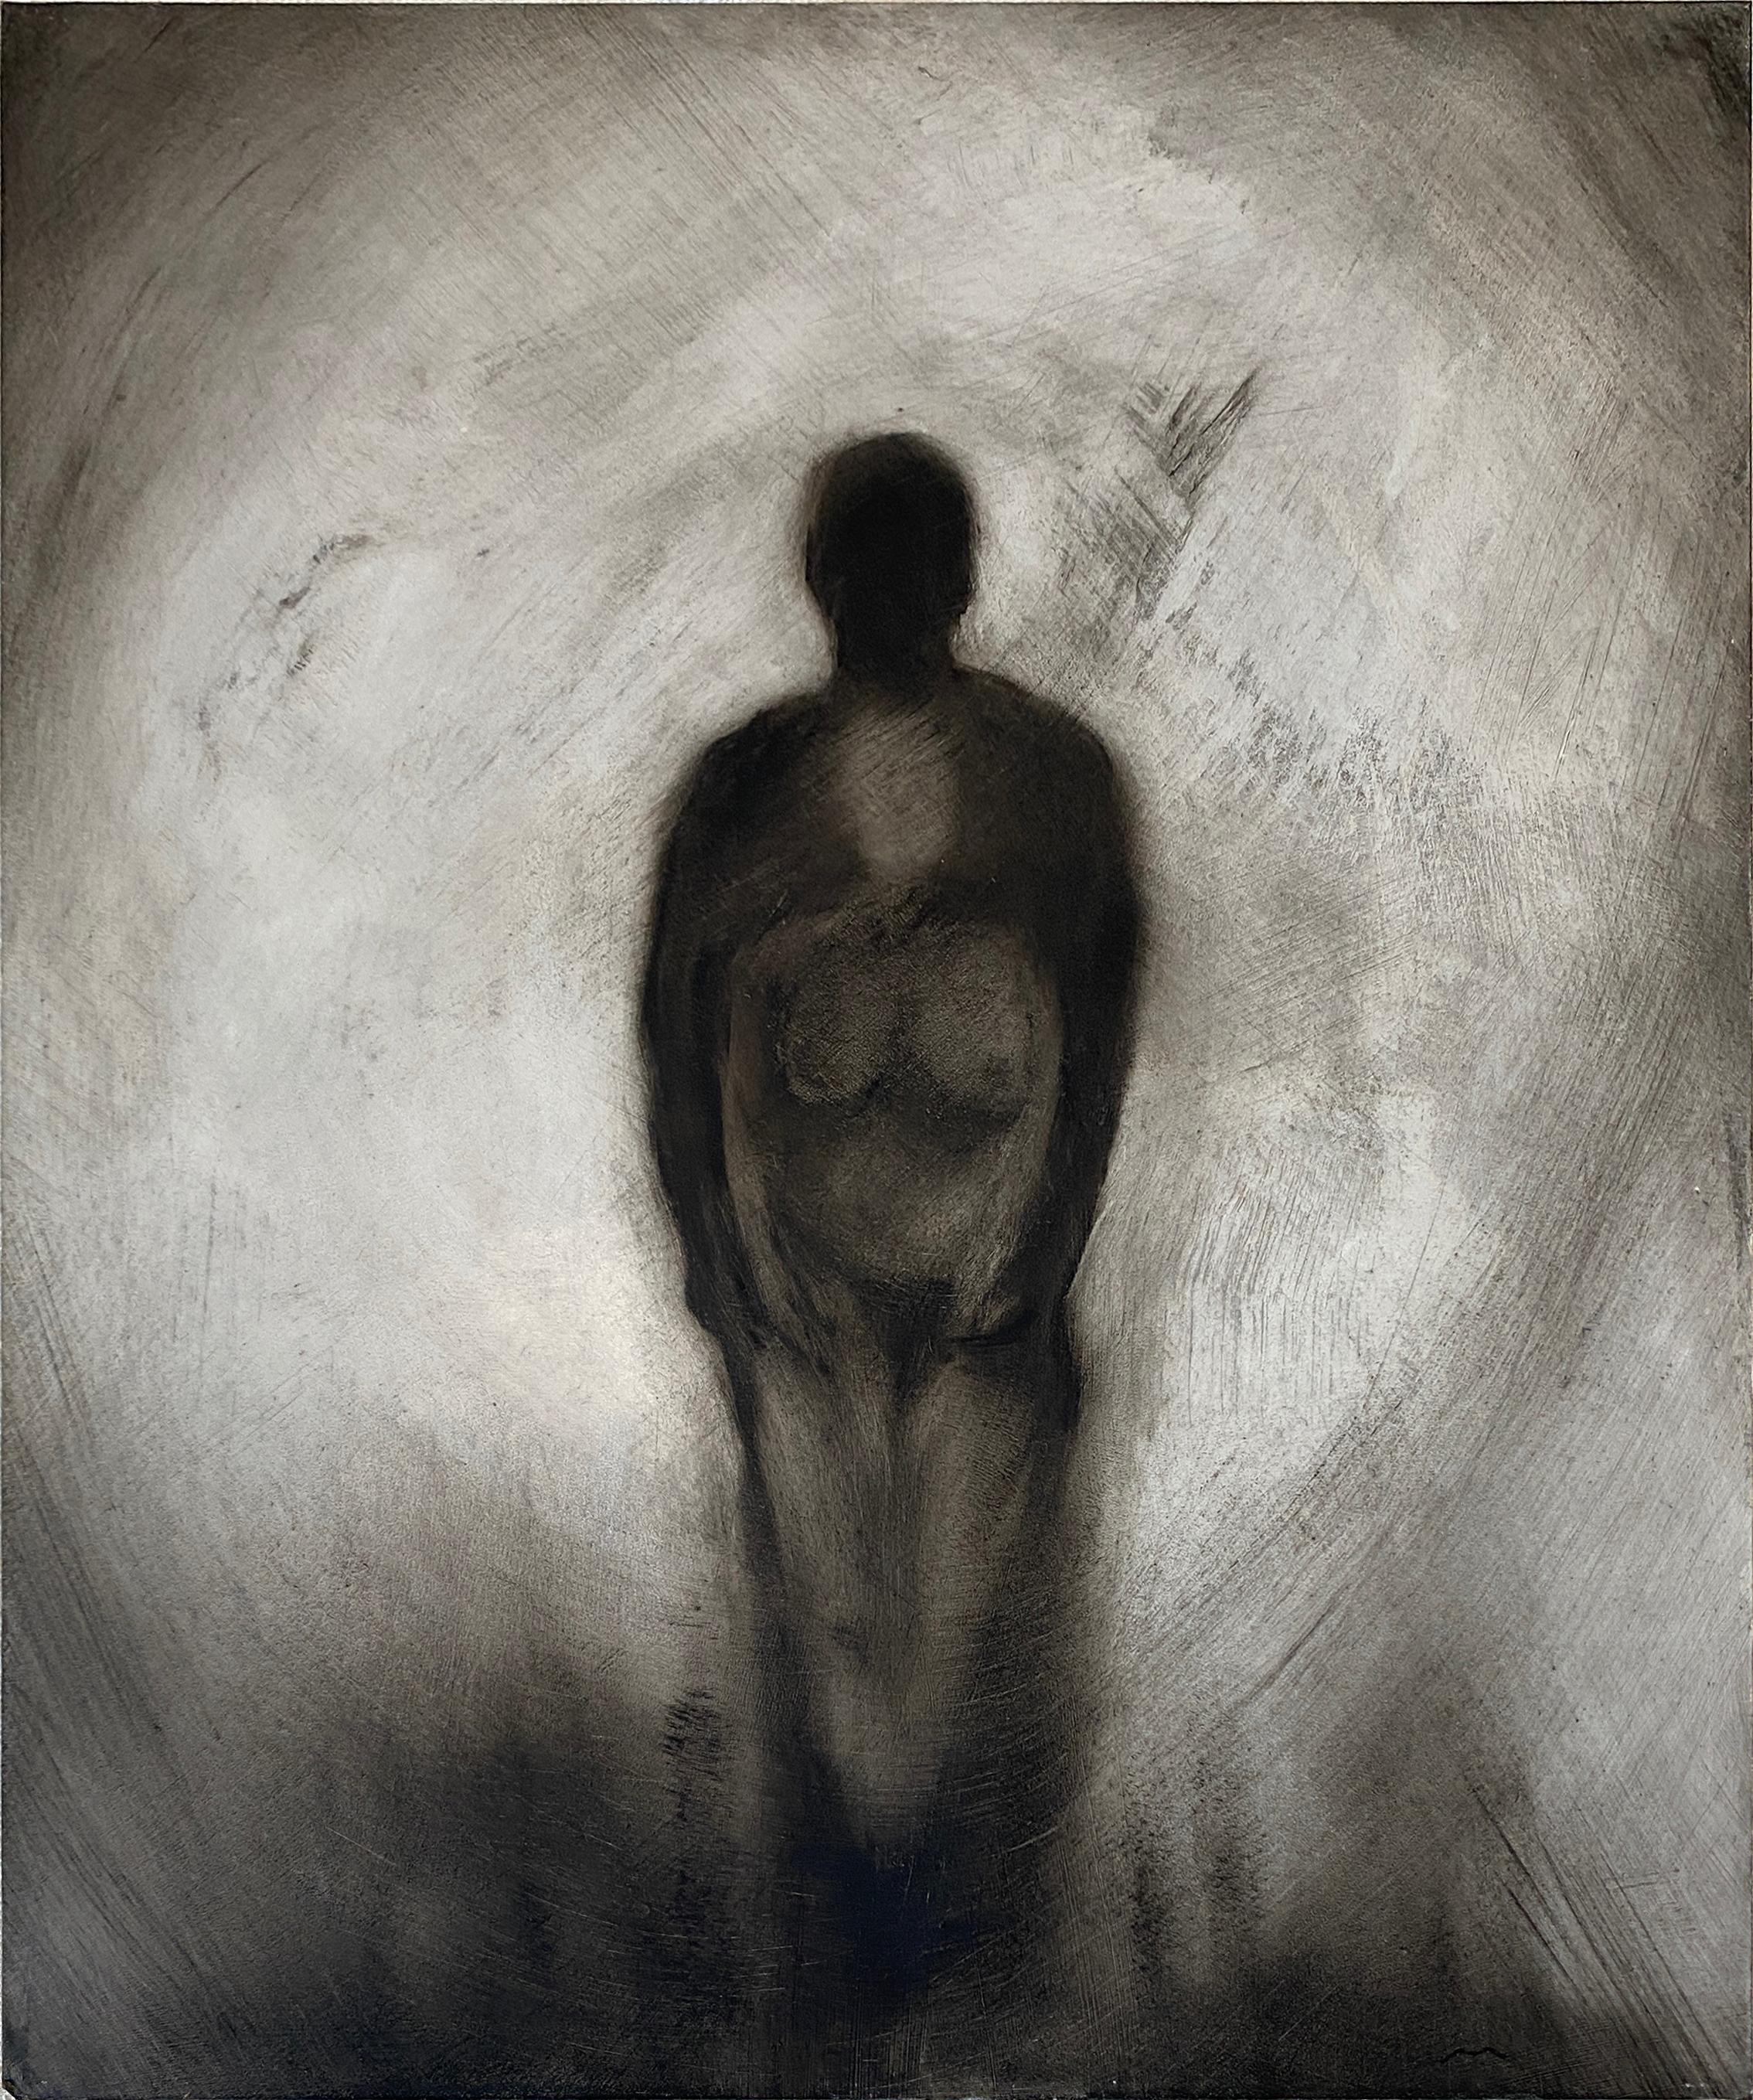 'Tethered' is a contemporary monochromatic oil on panel painting from Marc Barker's "Illusion of Mattering" series. The painting features two central figures - a dark, shadowed large figure, presumably male, behind a lighter female figure whose